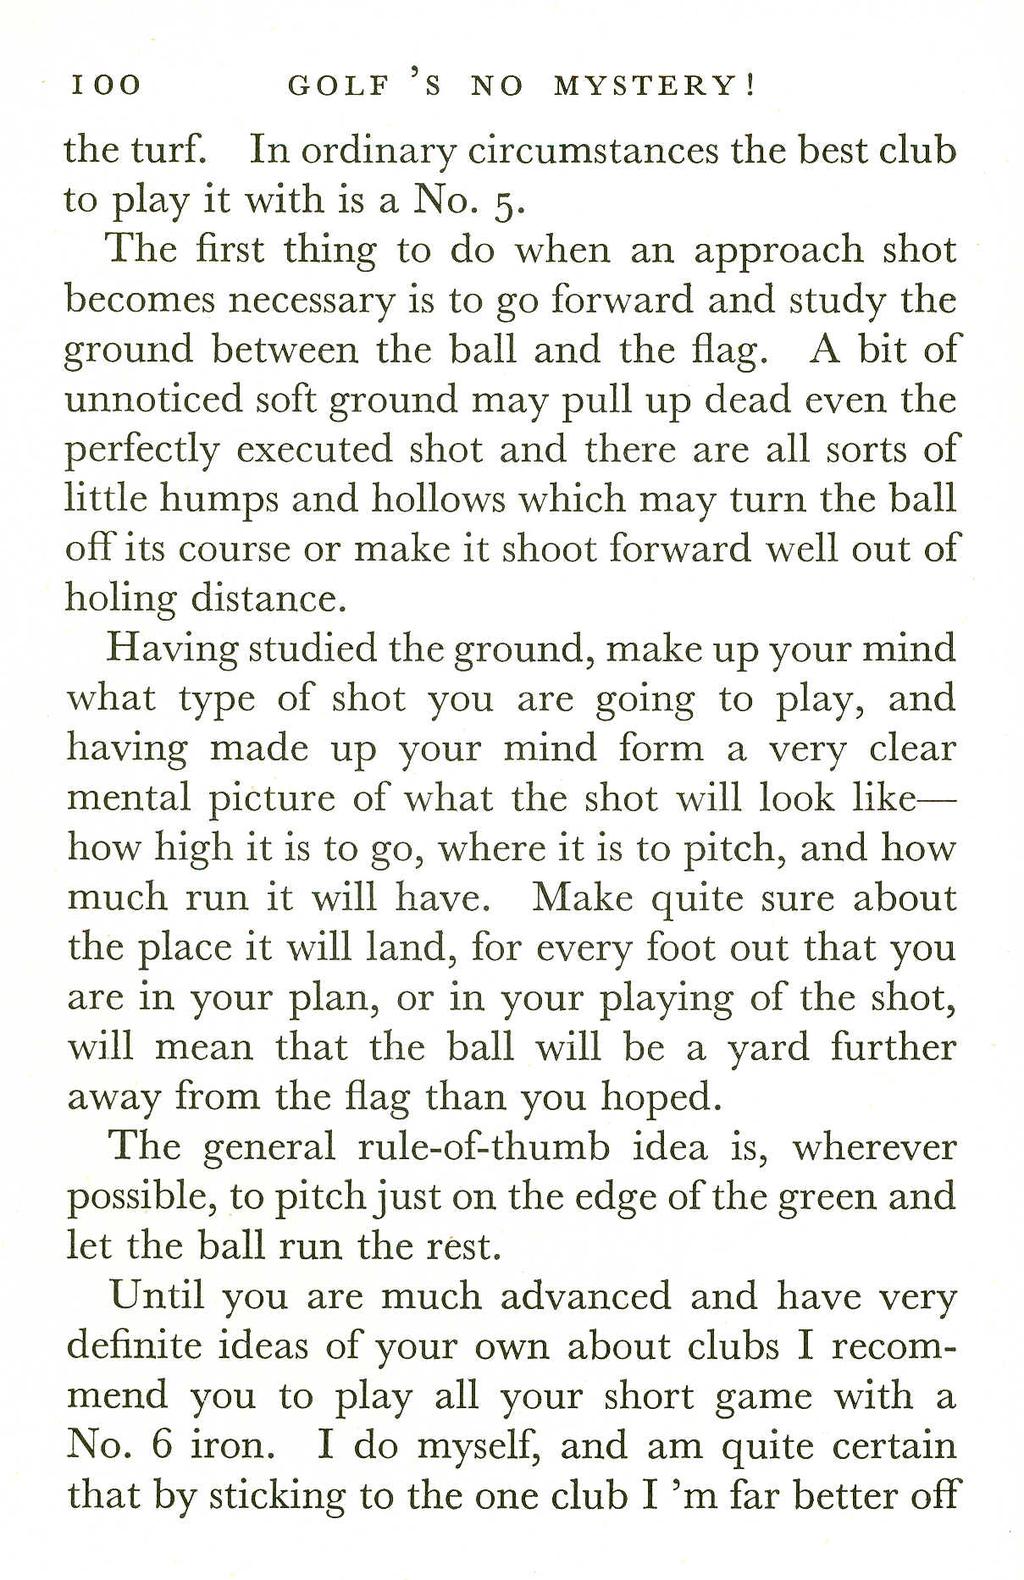 the turf. In ordinary circumstances the best club to play it with is a NO.5.